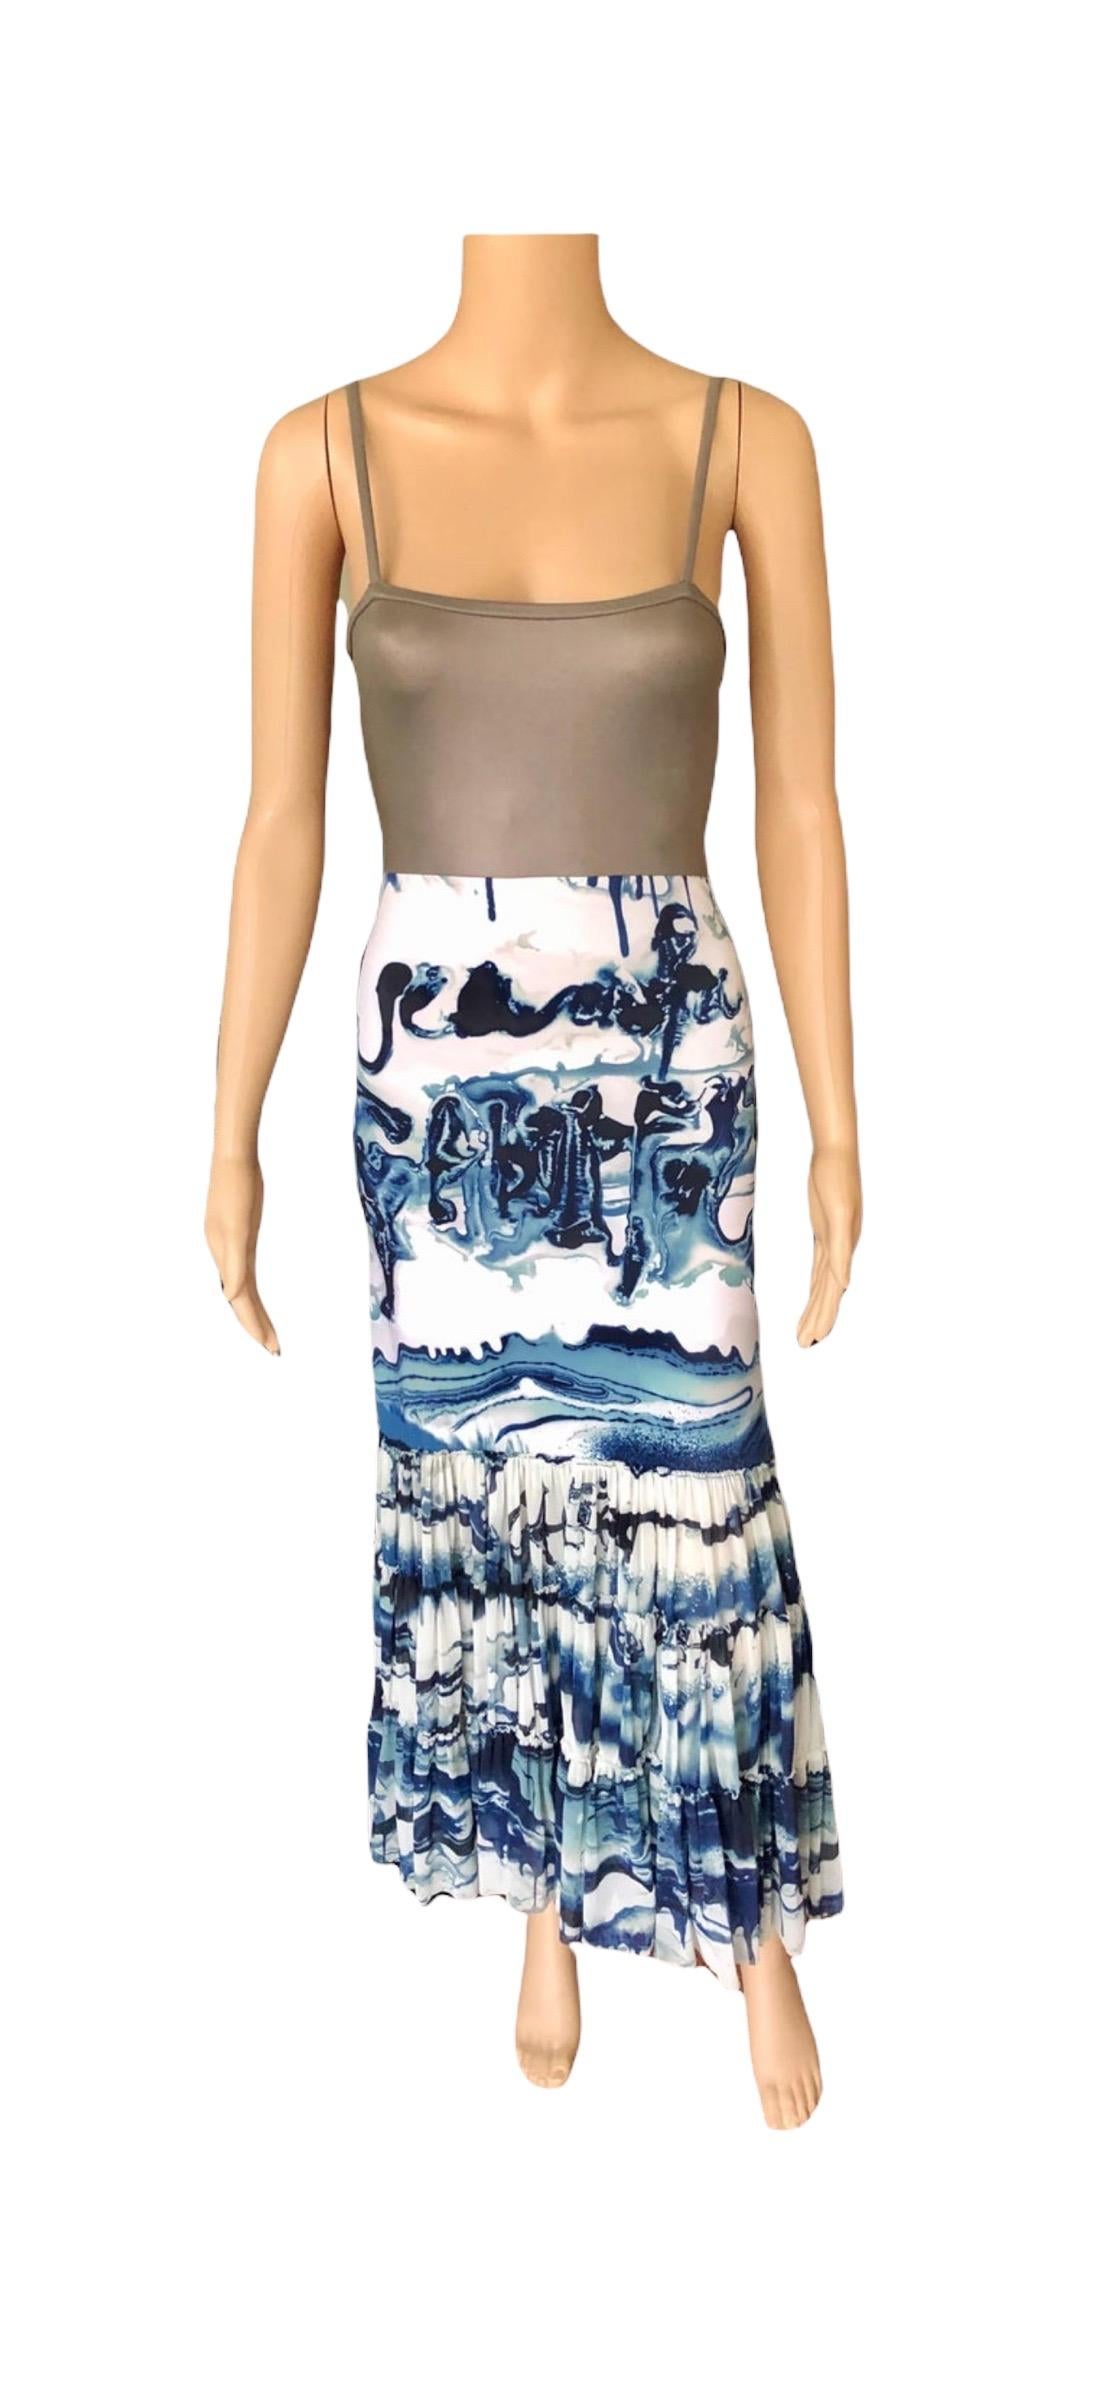 Jean Paul Gaultier Soleil F/W 2001 Metallic Abstract Print Maxi Dress In Good Condition For Sale In Naples, FL